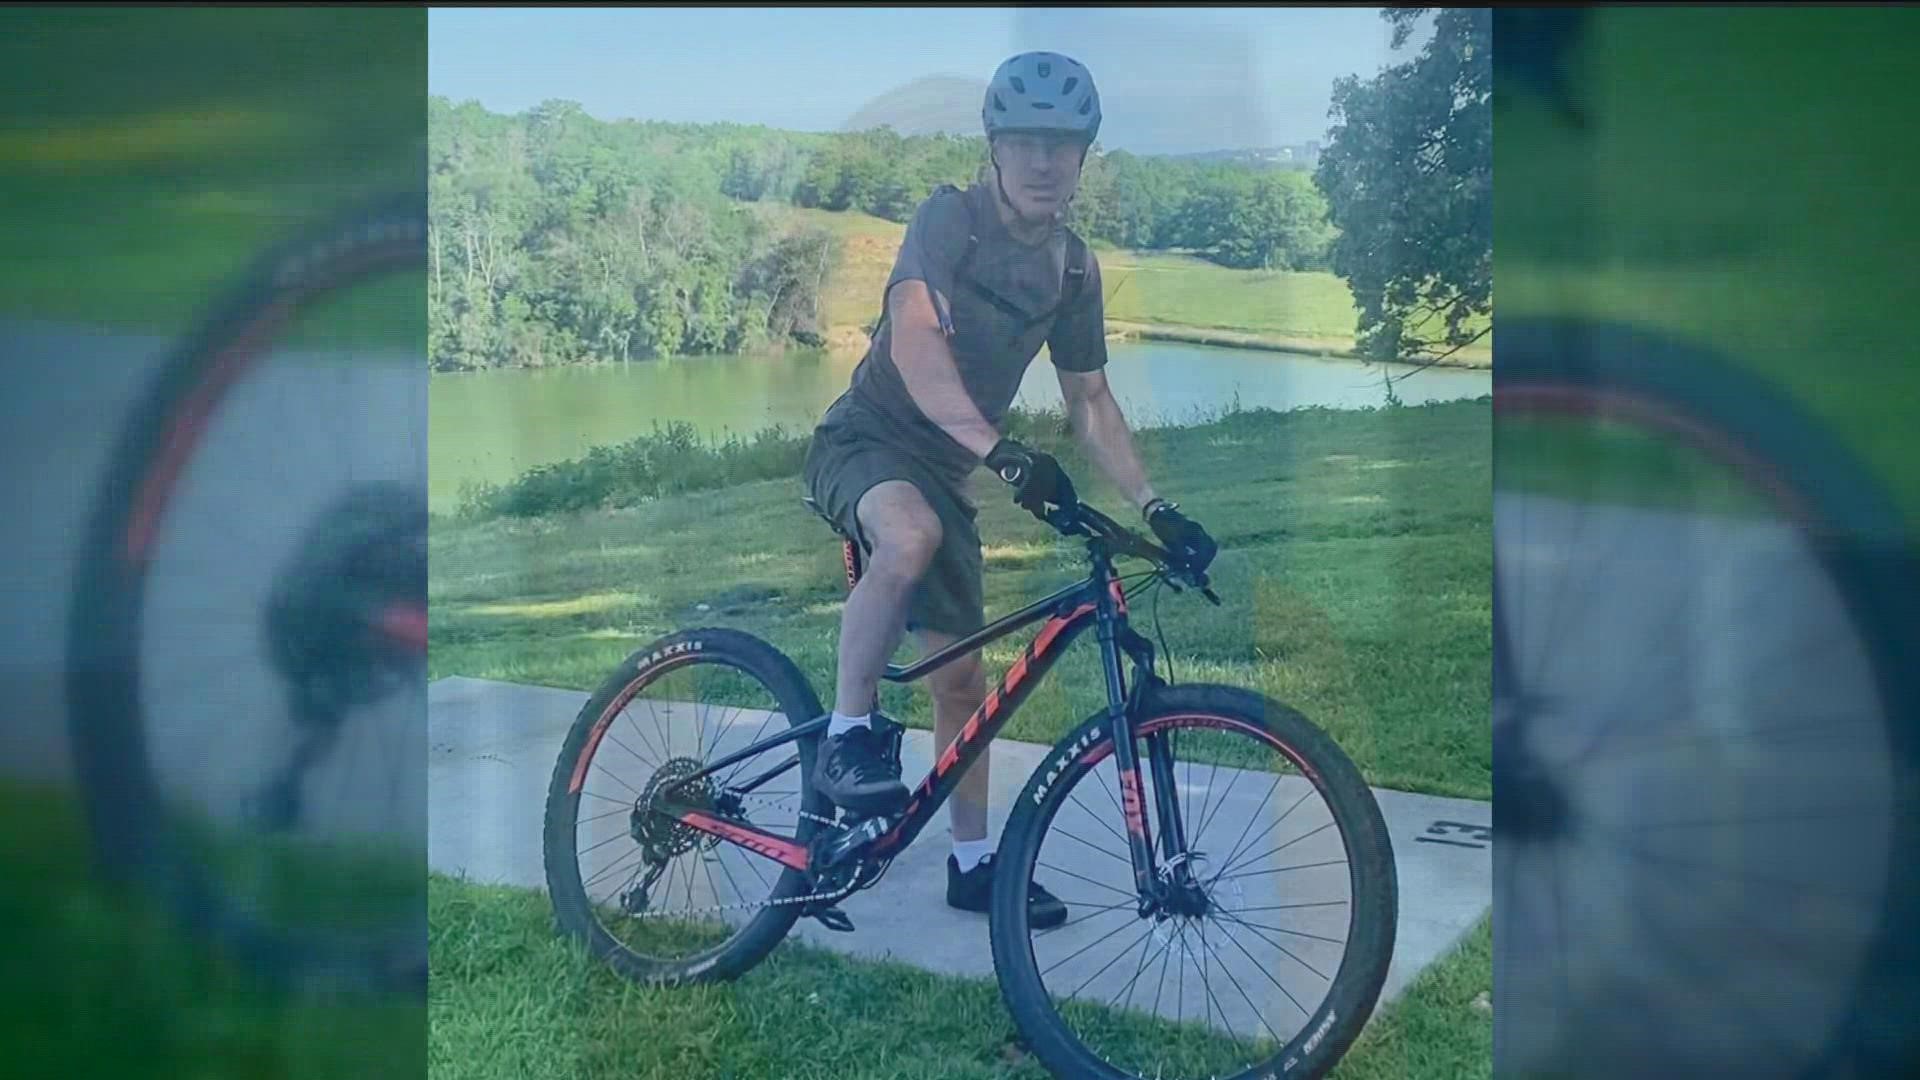 Faced with a terminal brain cancer diagnosis, Karl Vielhaber had plans to pass on his bike to his son. Then days after his death, it was gone.